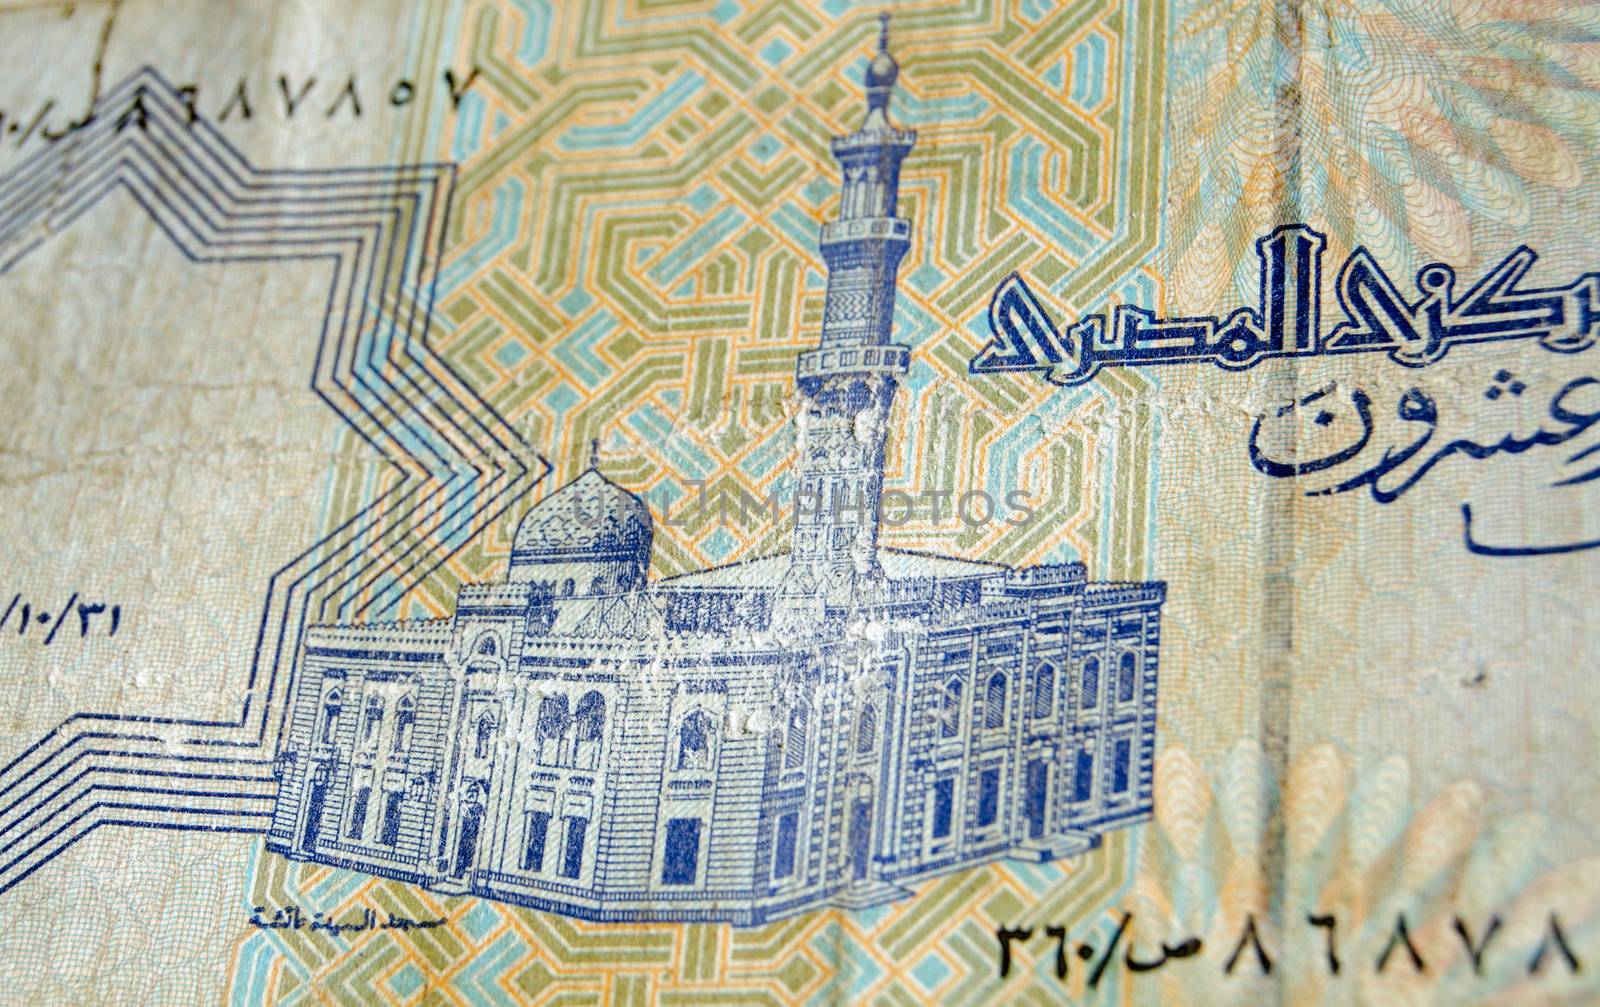 Reverse of the 25 piastres banknote from Egypt showing the historic Al-Sayida Aisha Mosque in Cairo.  Used and slightly battered banknote, photographed at an angle.